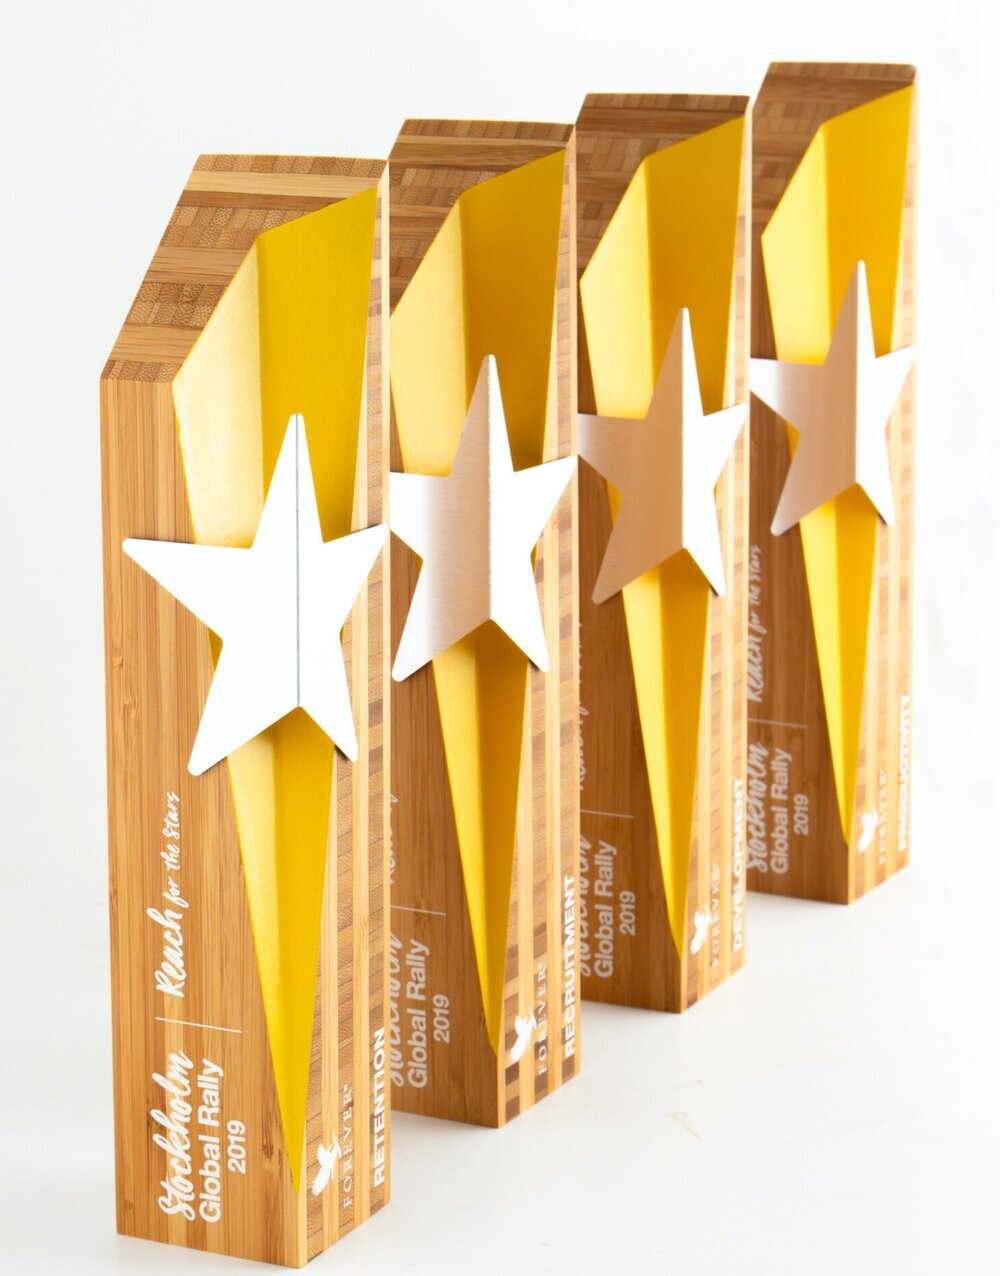 SCU modern beautiful sustainable wooden awards great for corporate recognition or service awards 3